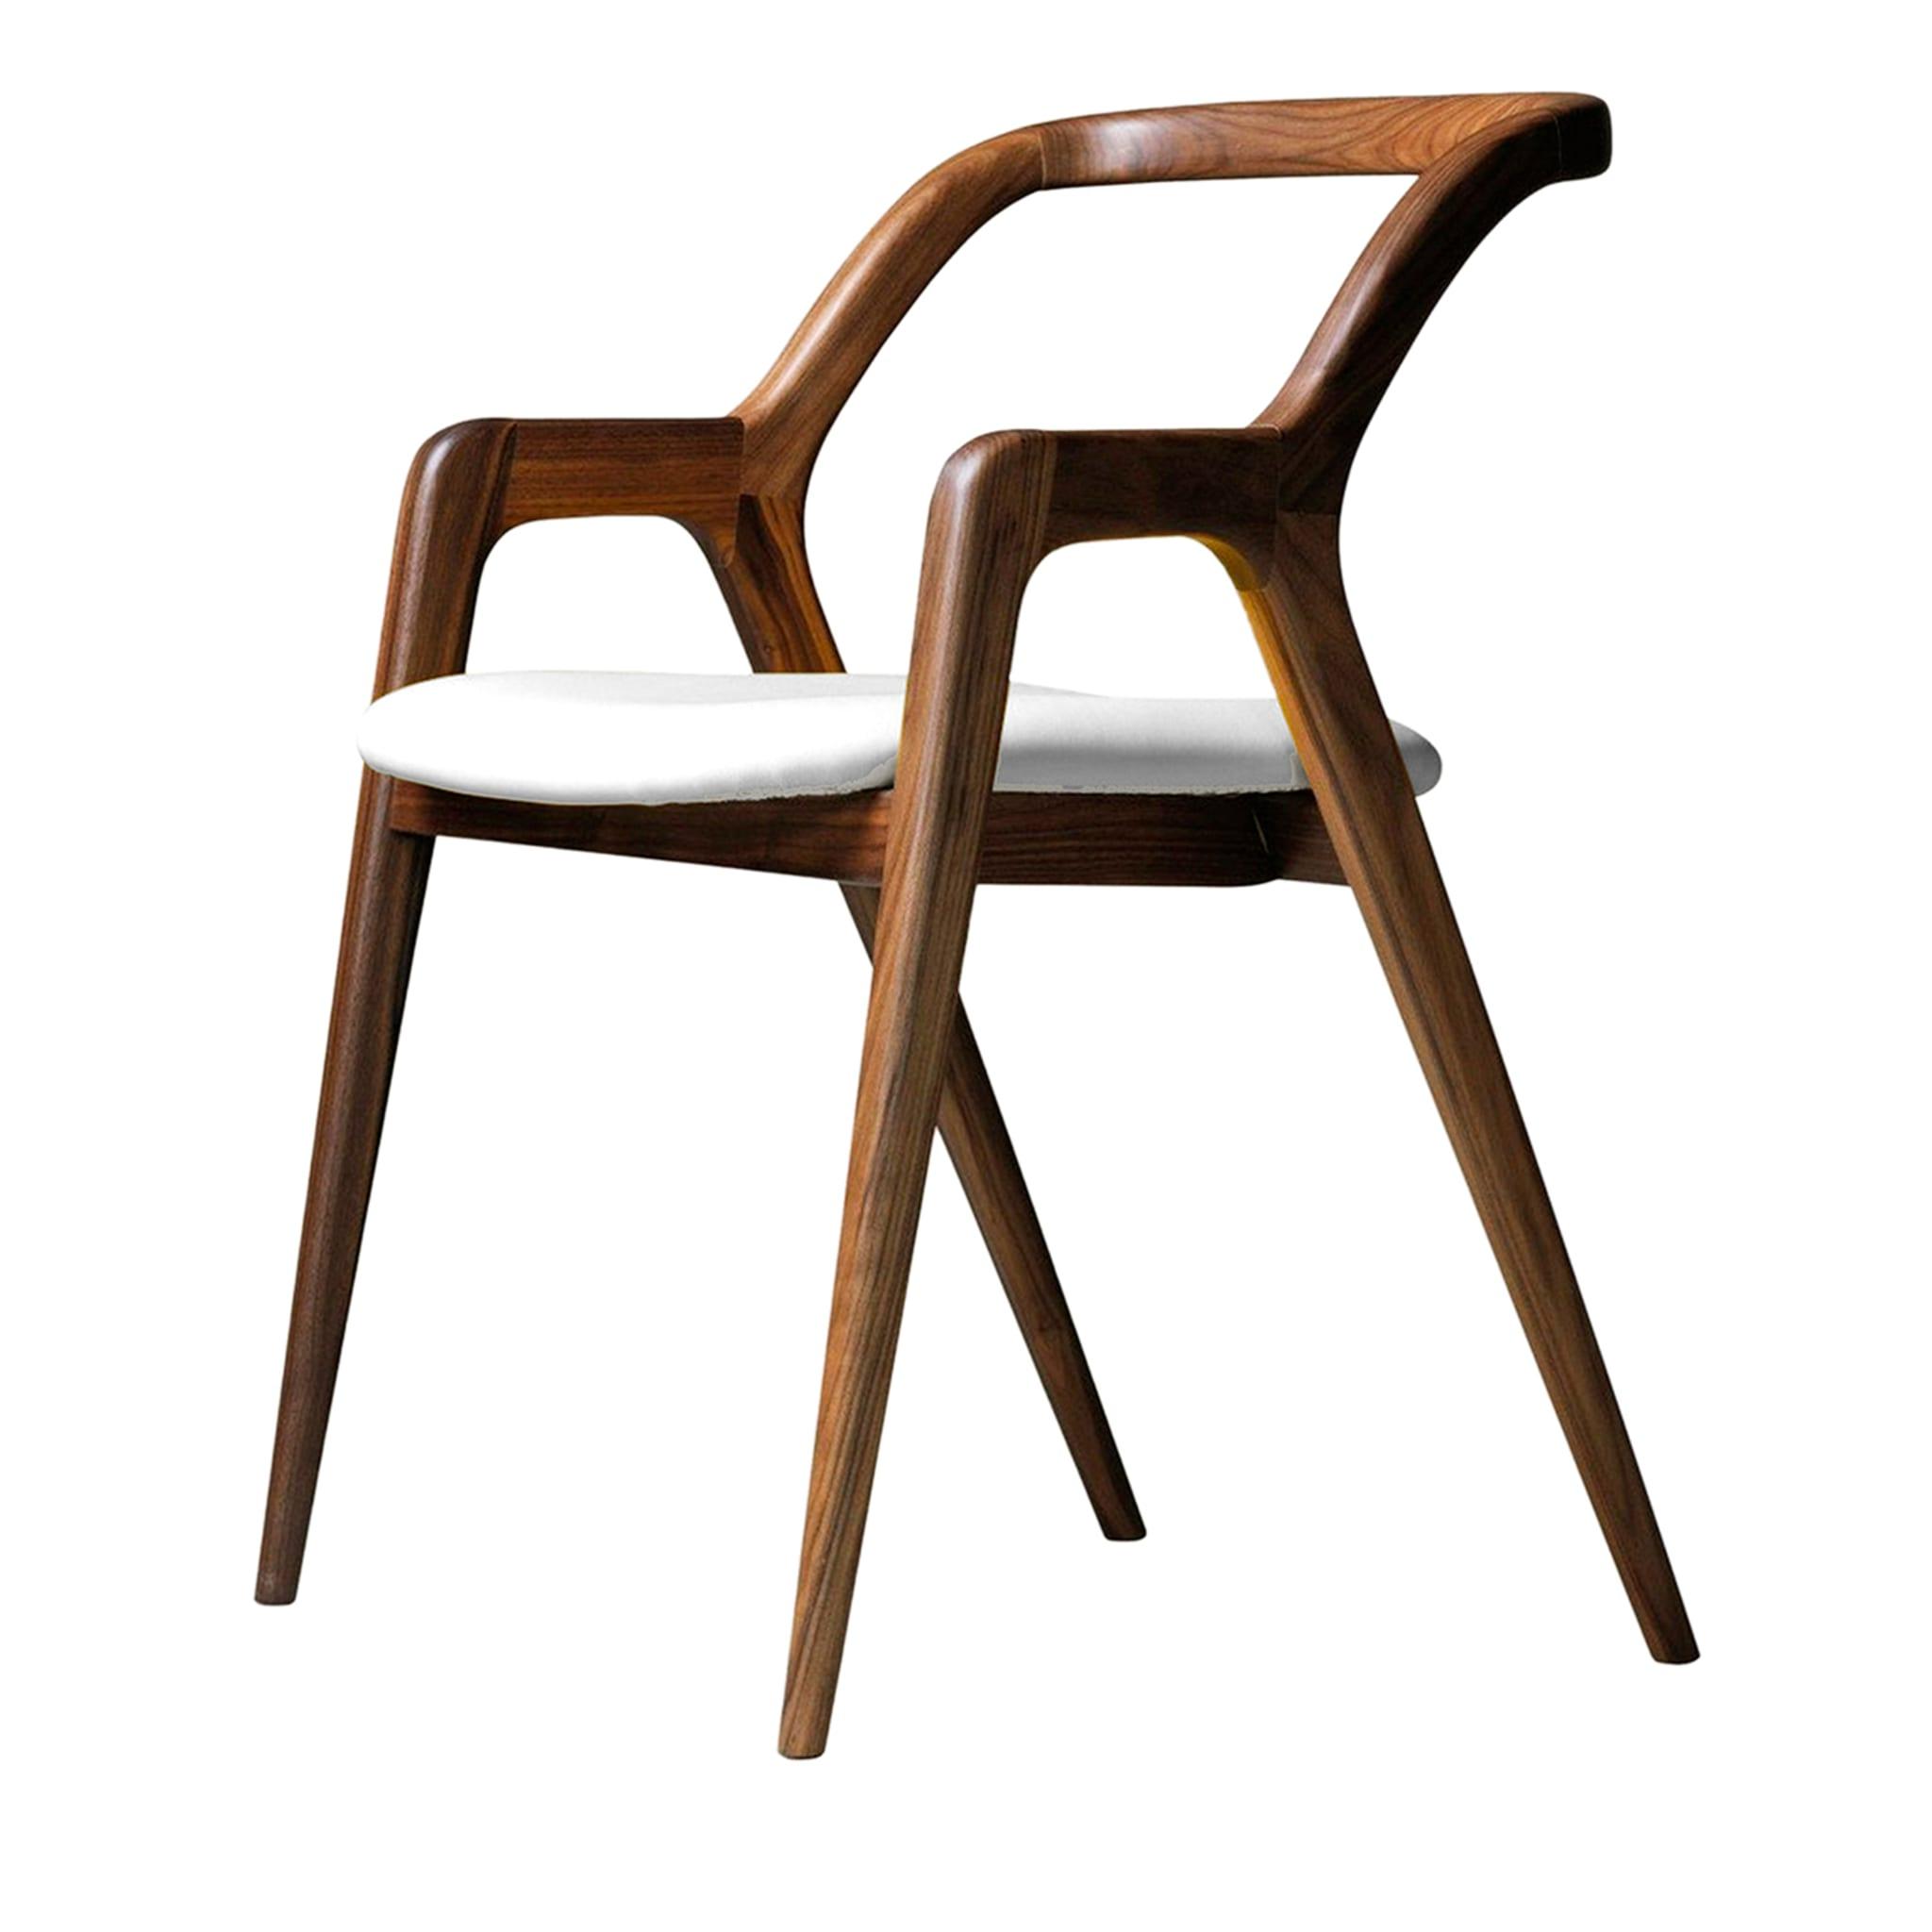 In Breve Natural Solid Walnut Chair ☞ Upholstery: Leather PANDORA 622